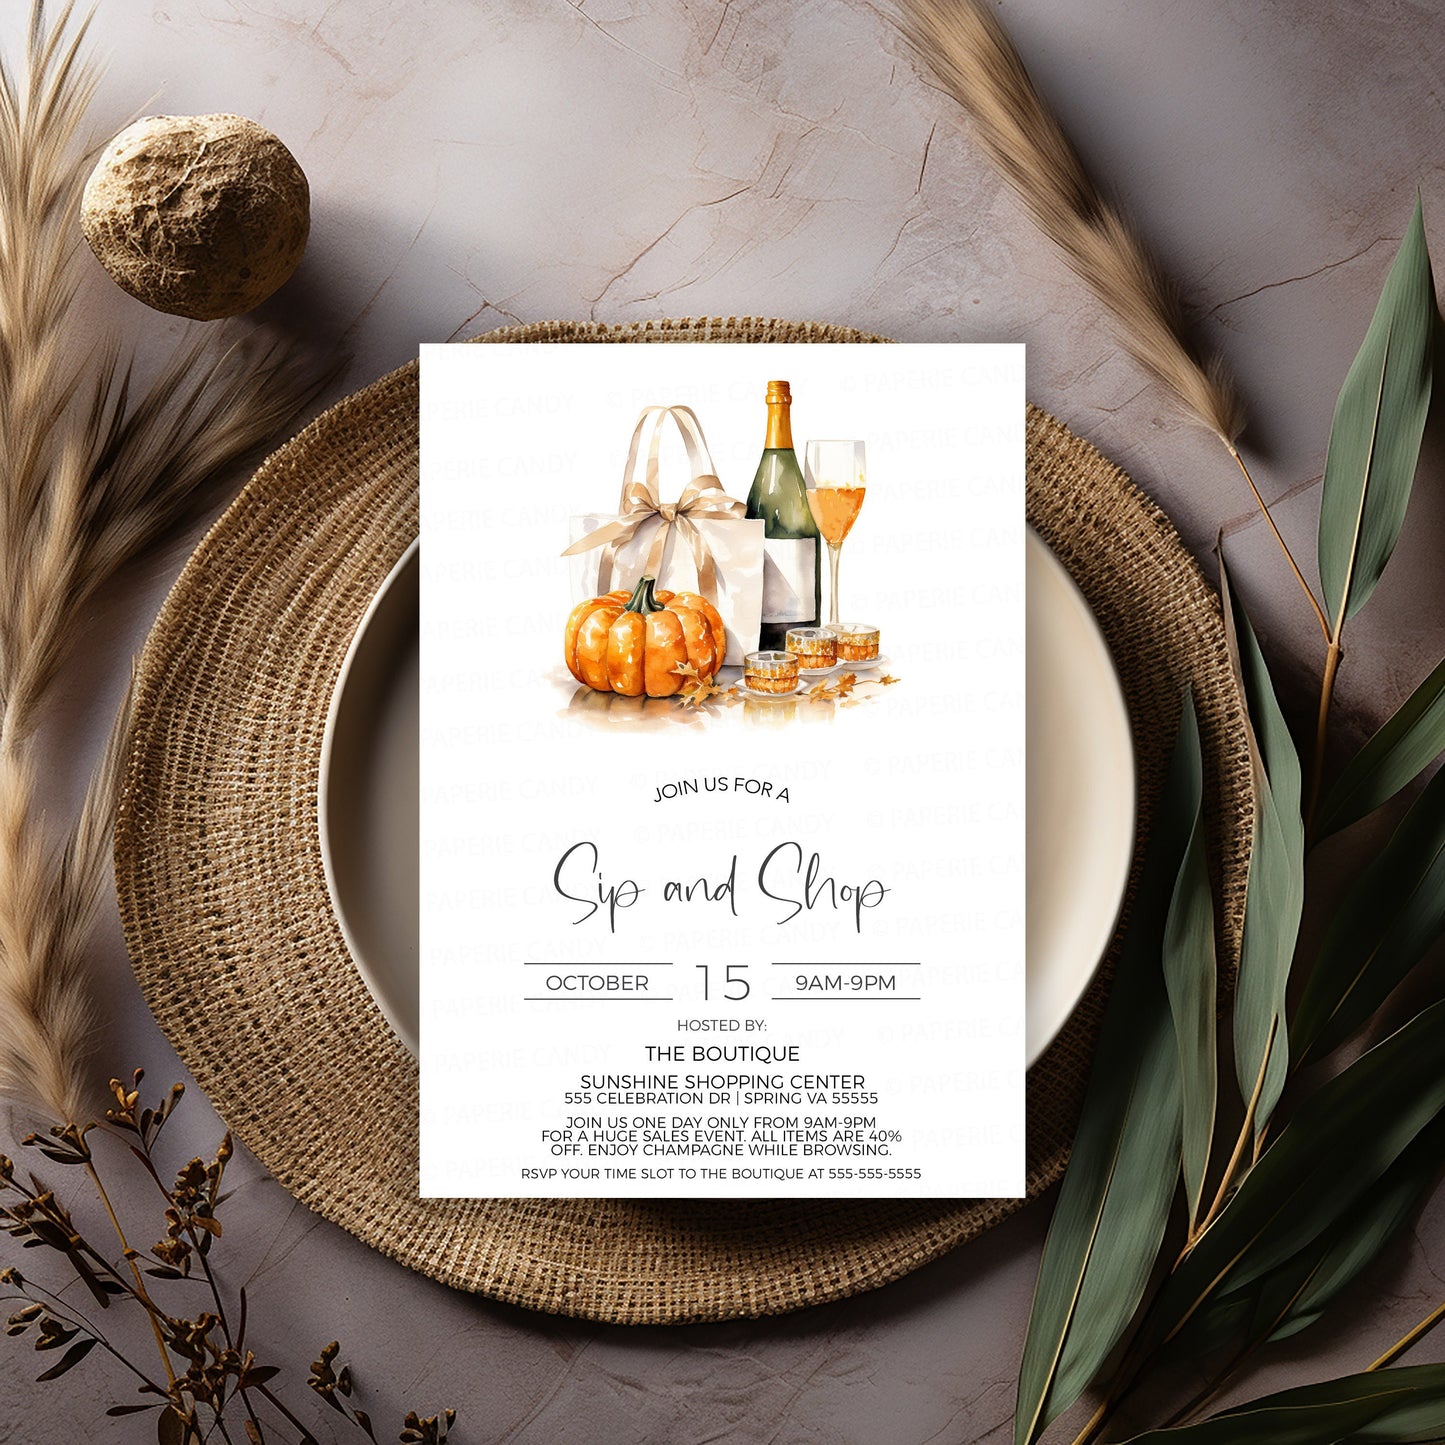 Fall Sip And Shop Invitation, Autumn Sip and Shop Invite, Thanksgiving Boutique Store Holiday Sale Event, Champagne Wine Shopping, Editable